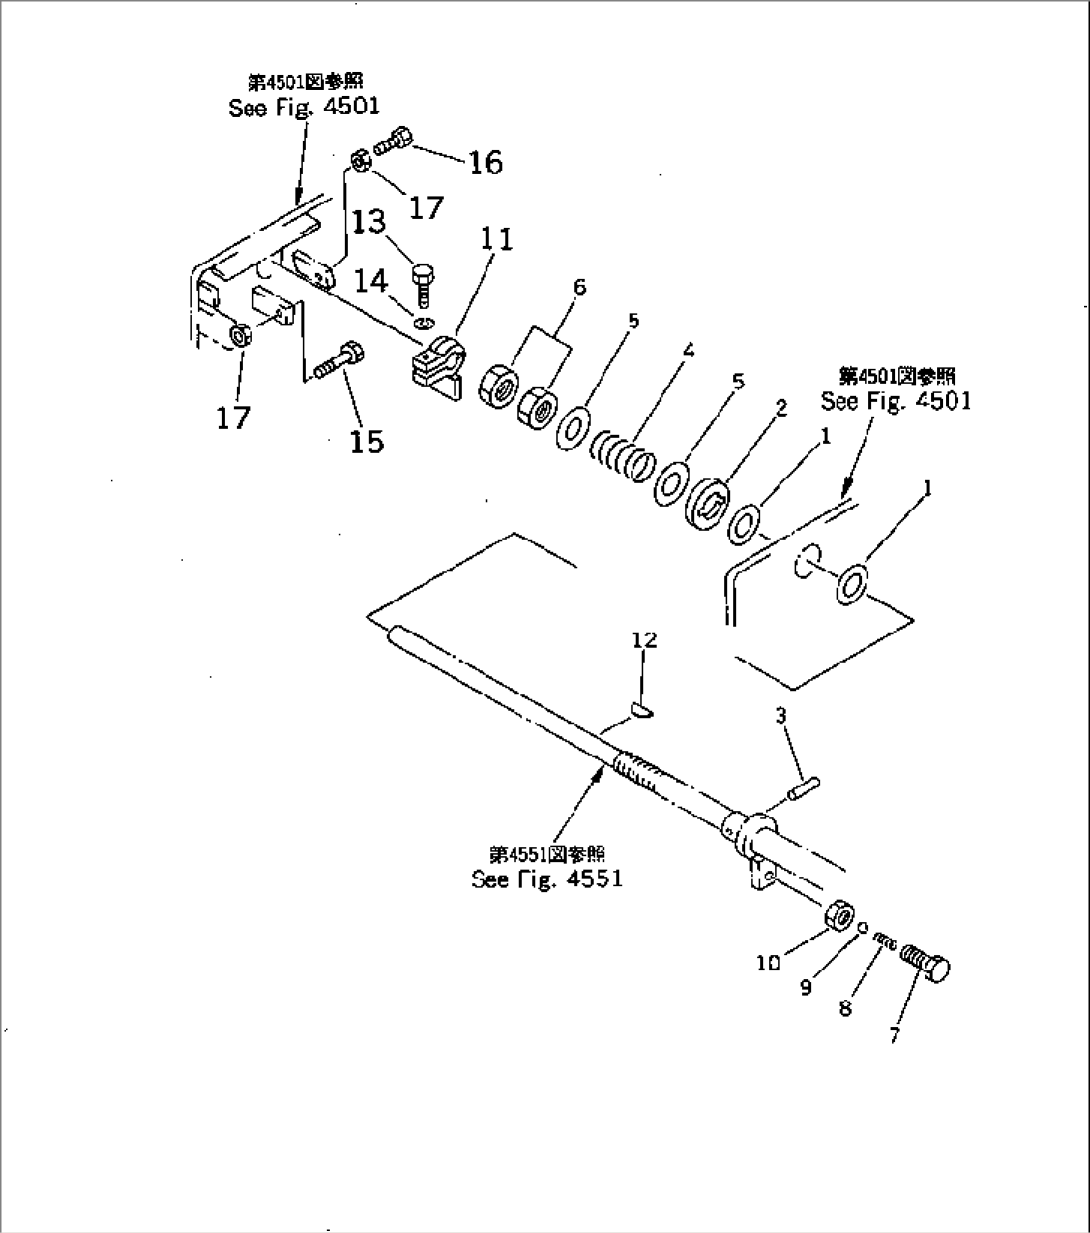 ROTOR REVOLUTION CONTROL (3/3) (LEVER AND LINKAGE)